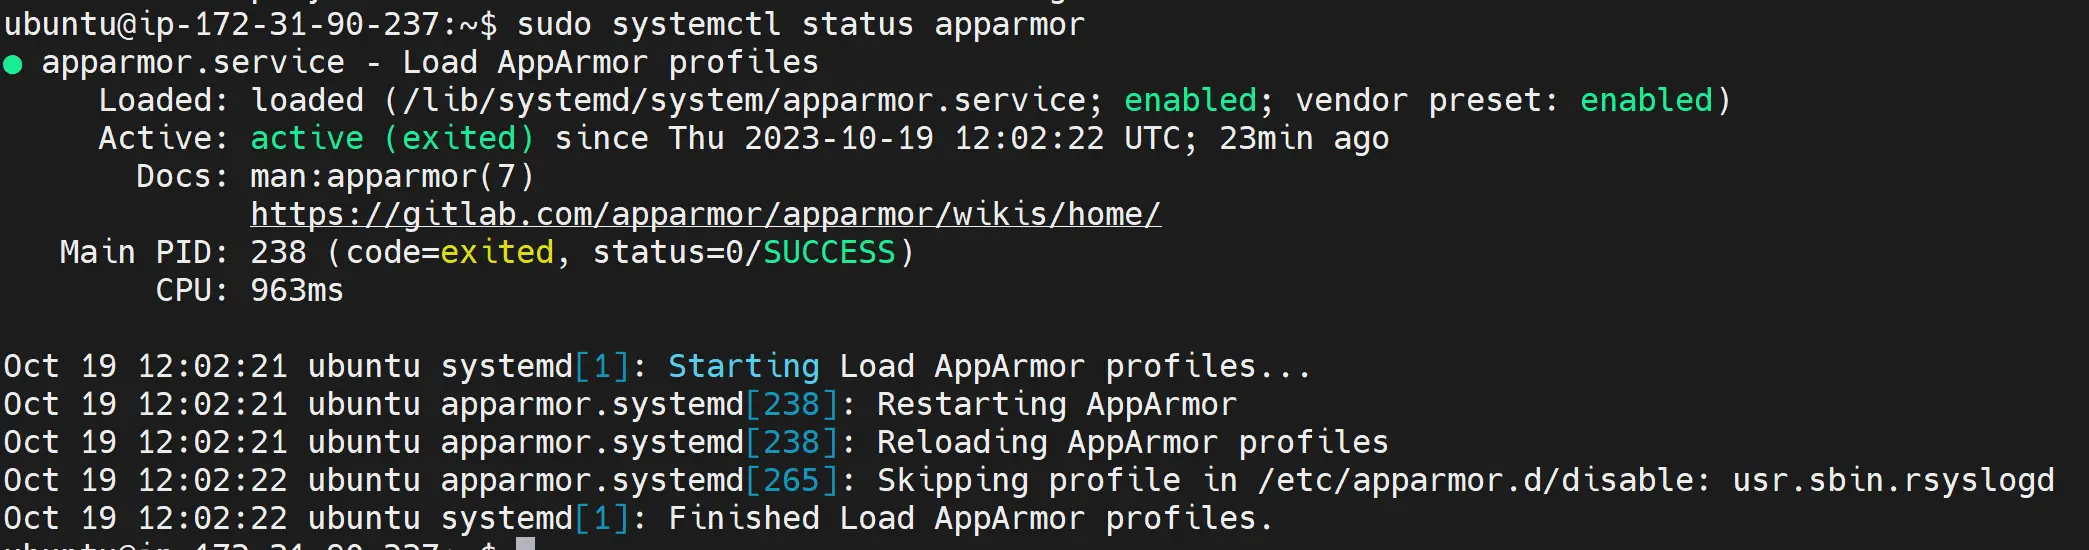 Kubernetes Security with AppArmor - Whitelisting and Restricting Kubernetes Access Using AppArmor